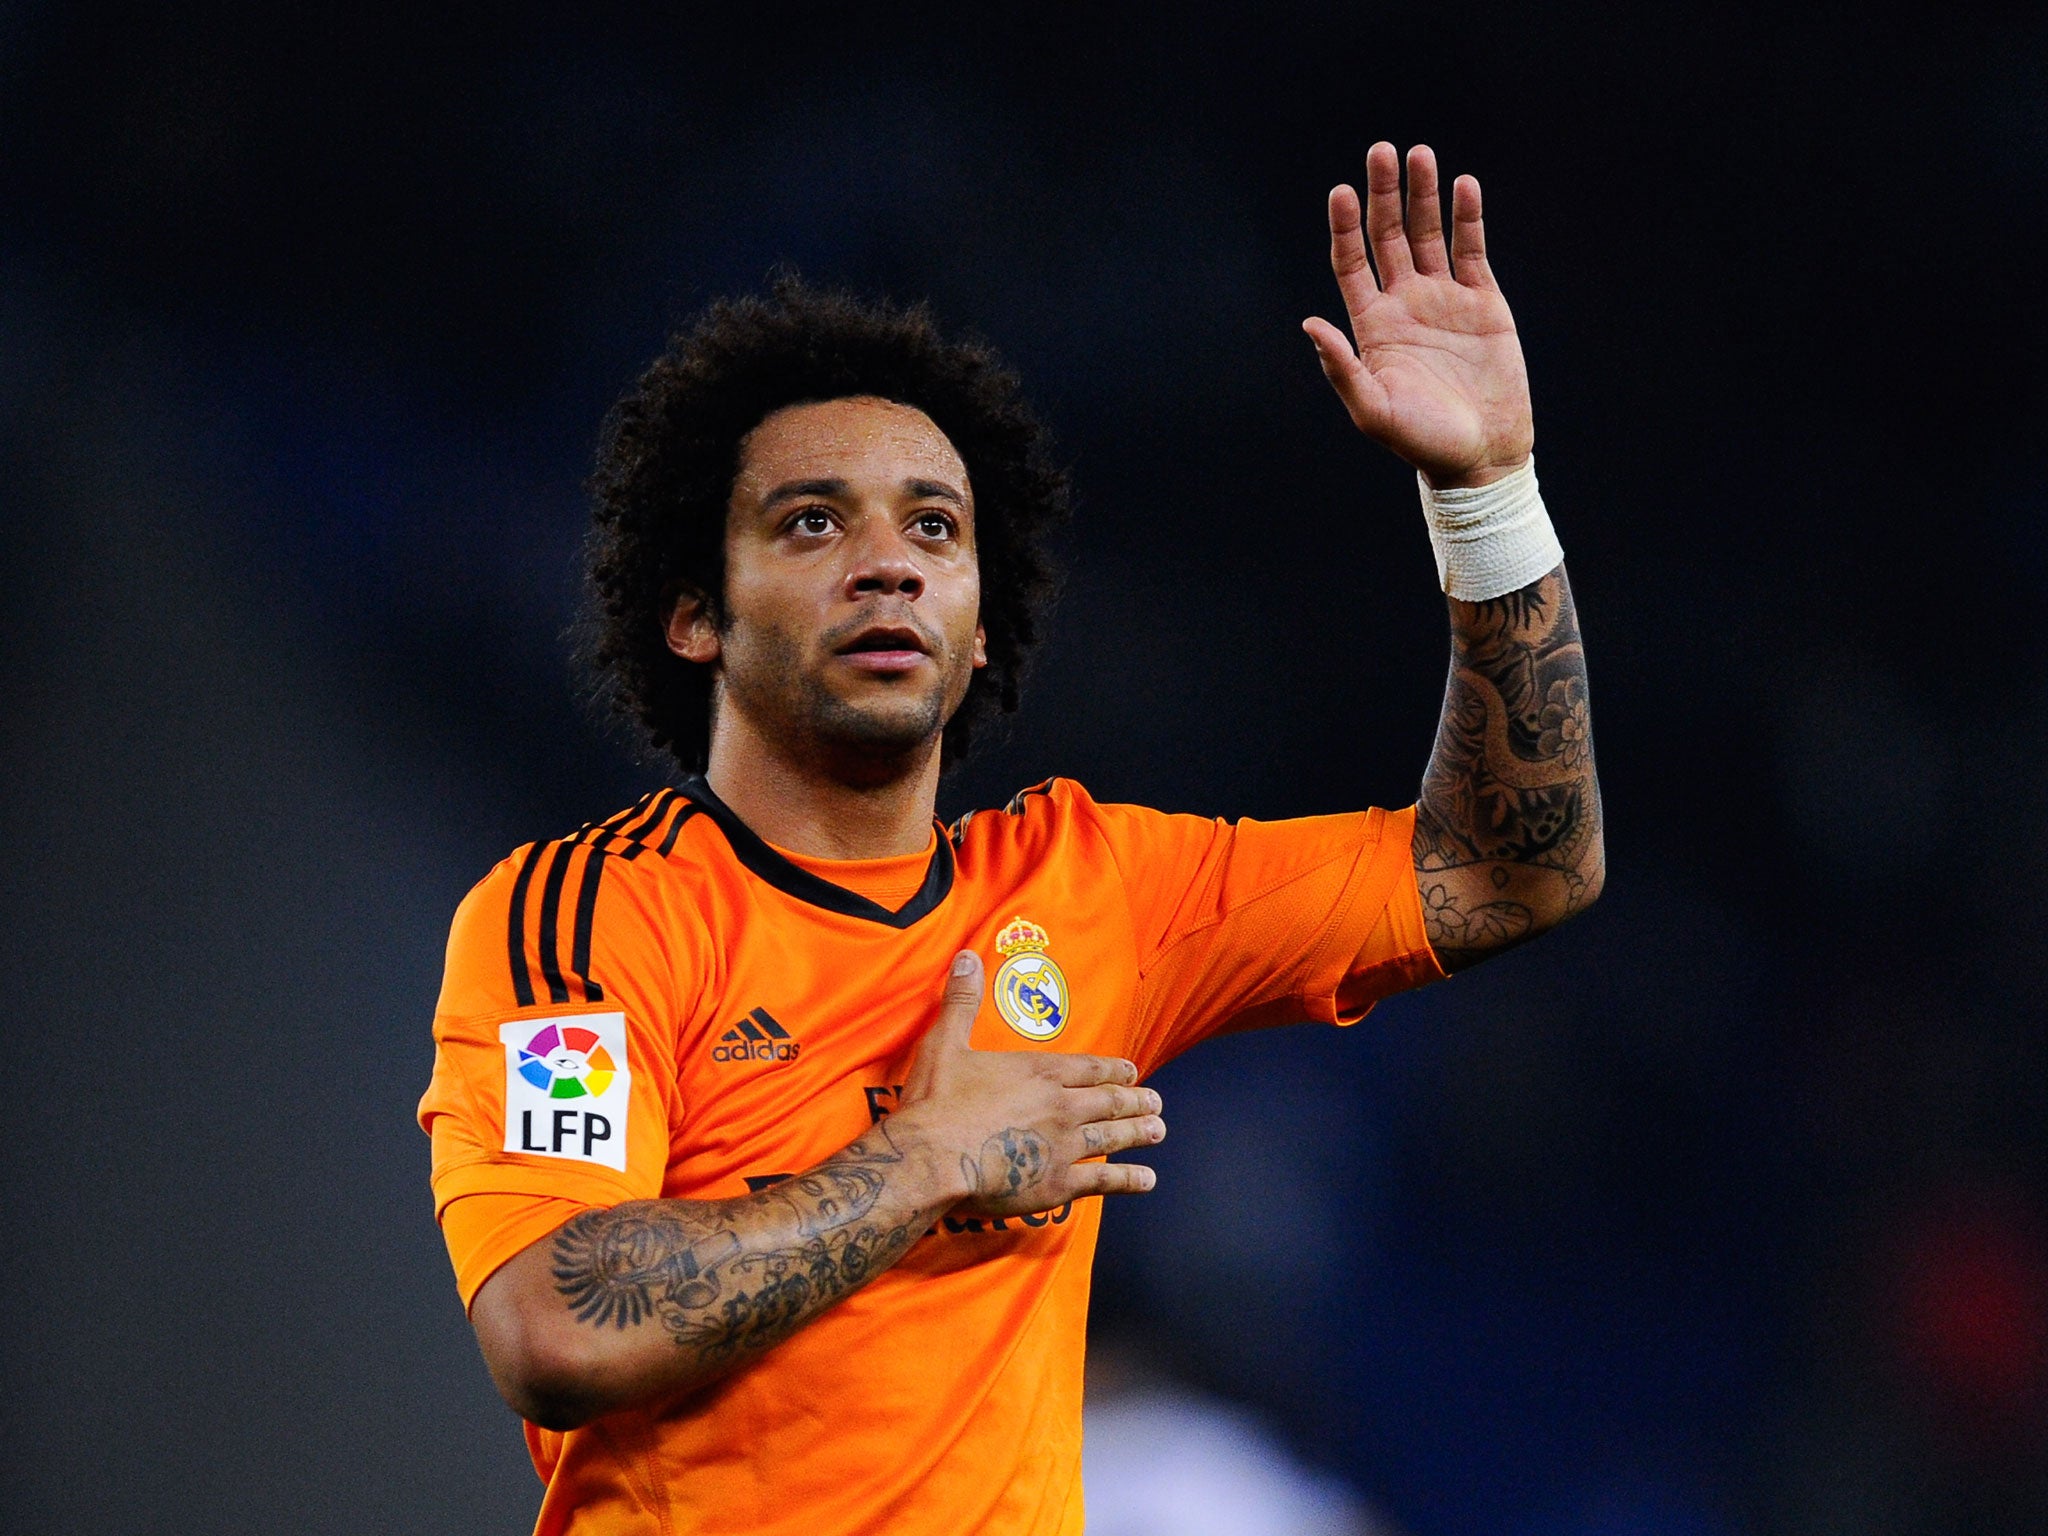 Marcelo was the target of alleged vile racial abuse from the Atletico Madrid fans